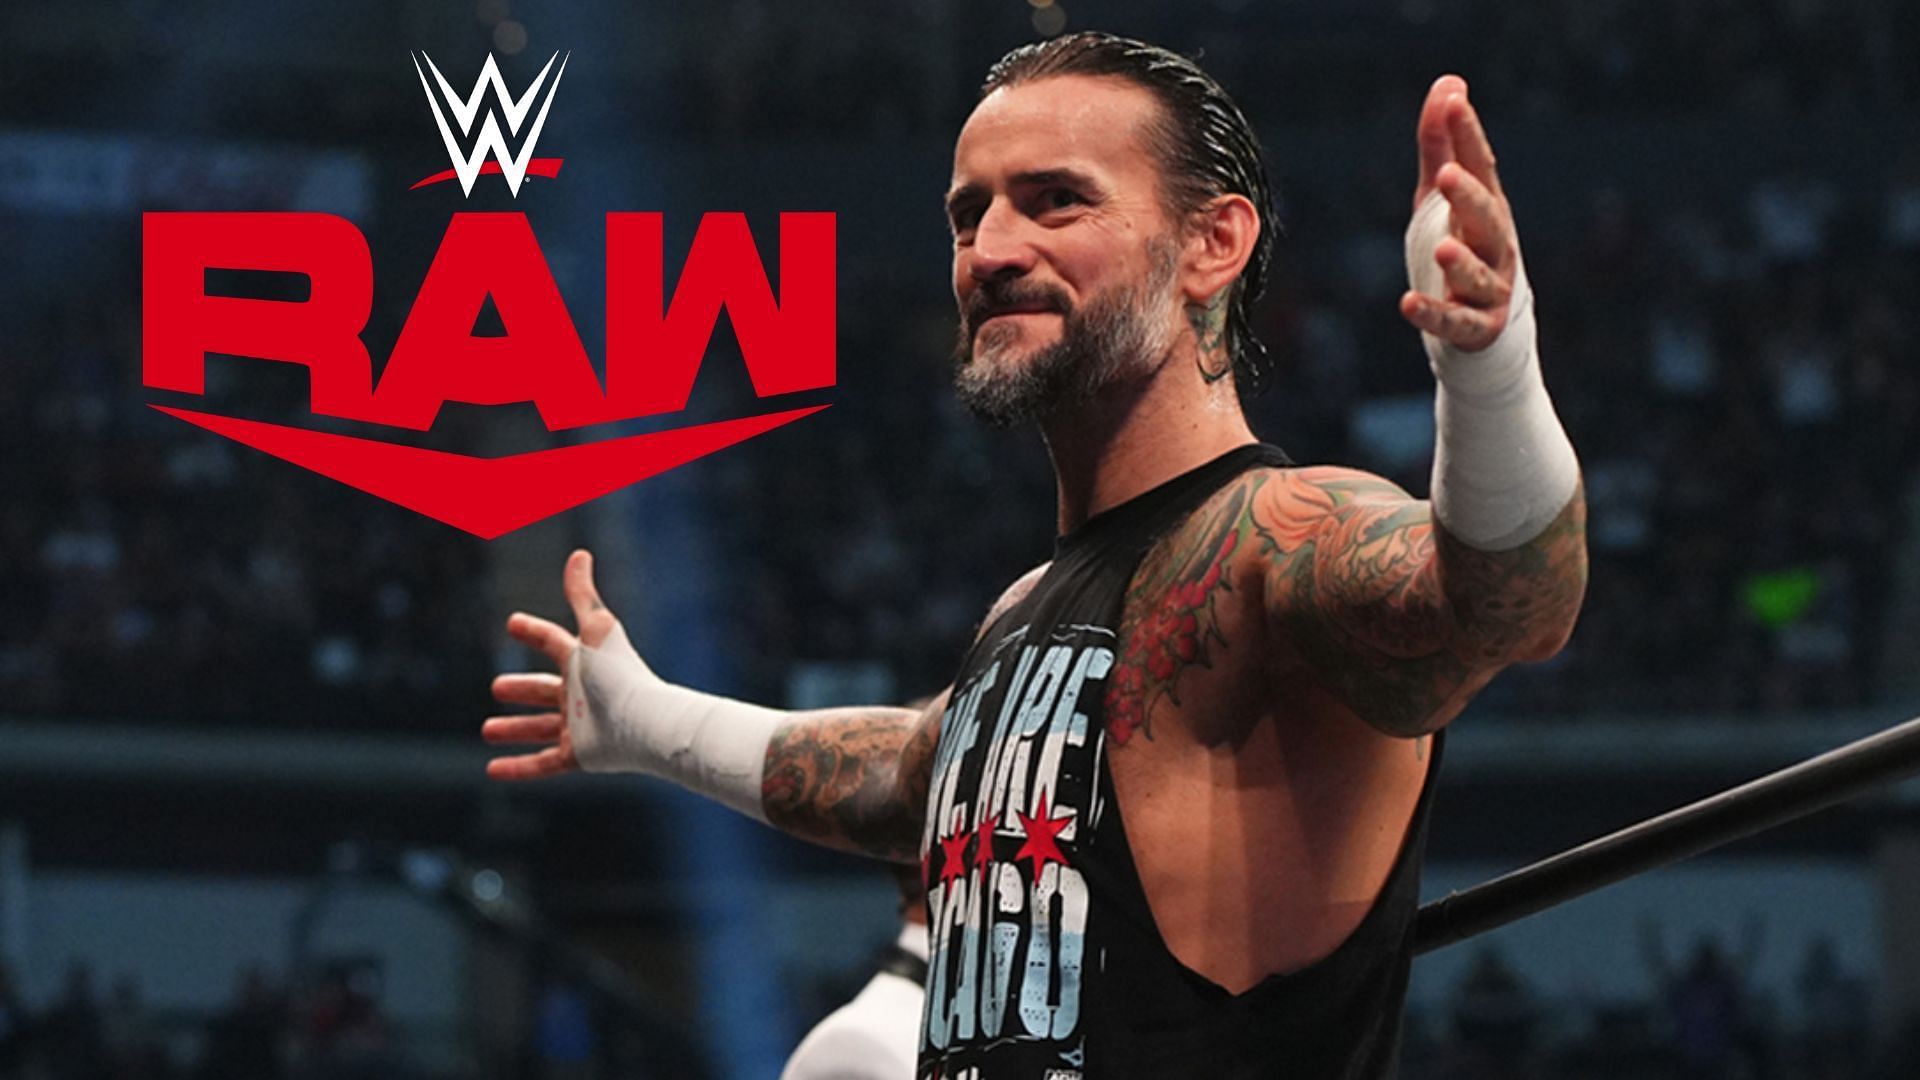 CM Punk recently visited RAW despite being under AEW contract.